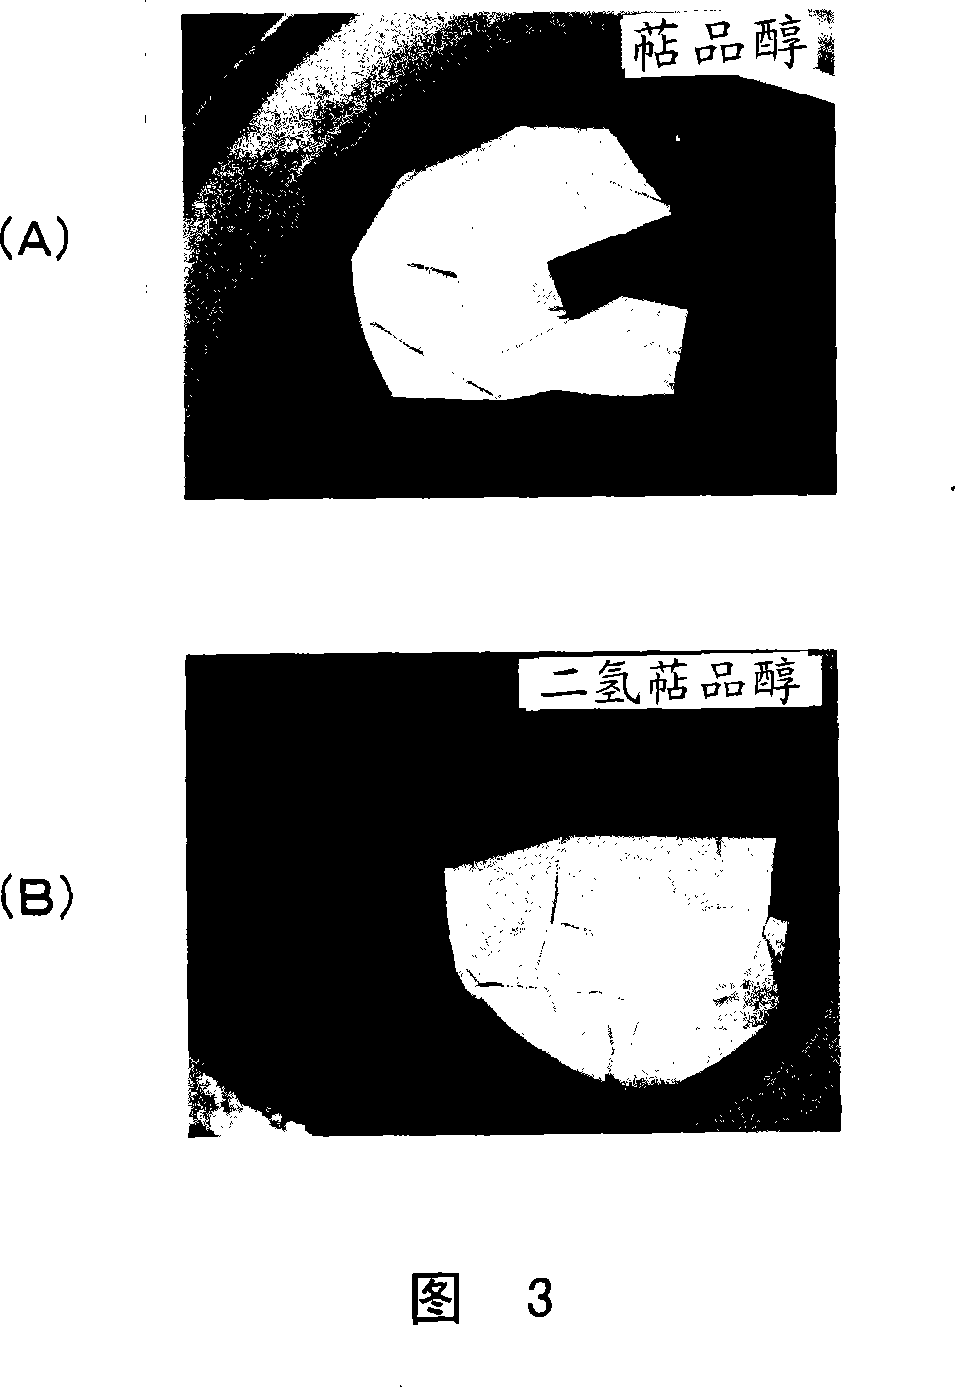 Conductive paste, lamination ceramics electronic assembly and method for manufacturing the electronic assembly